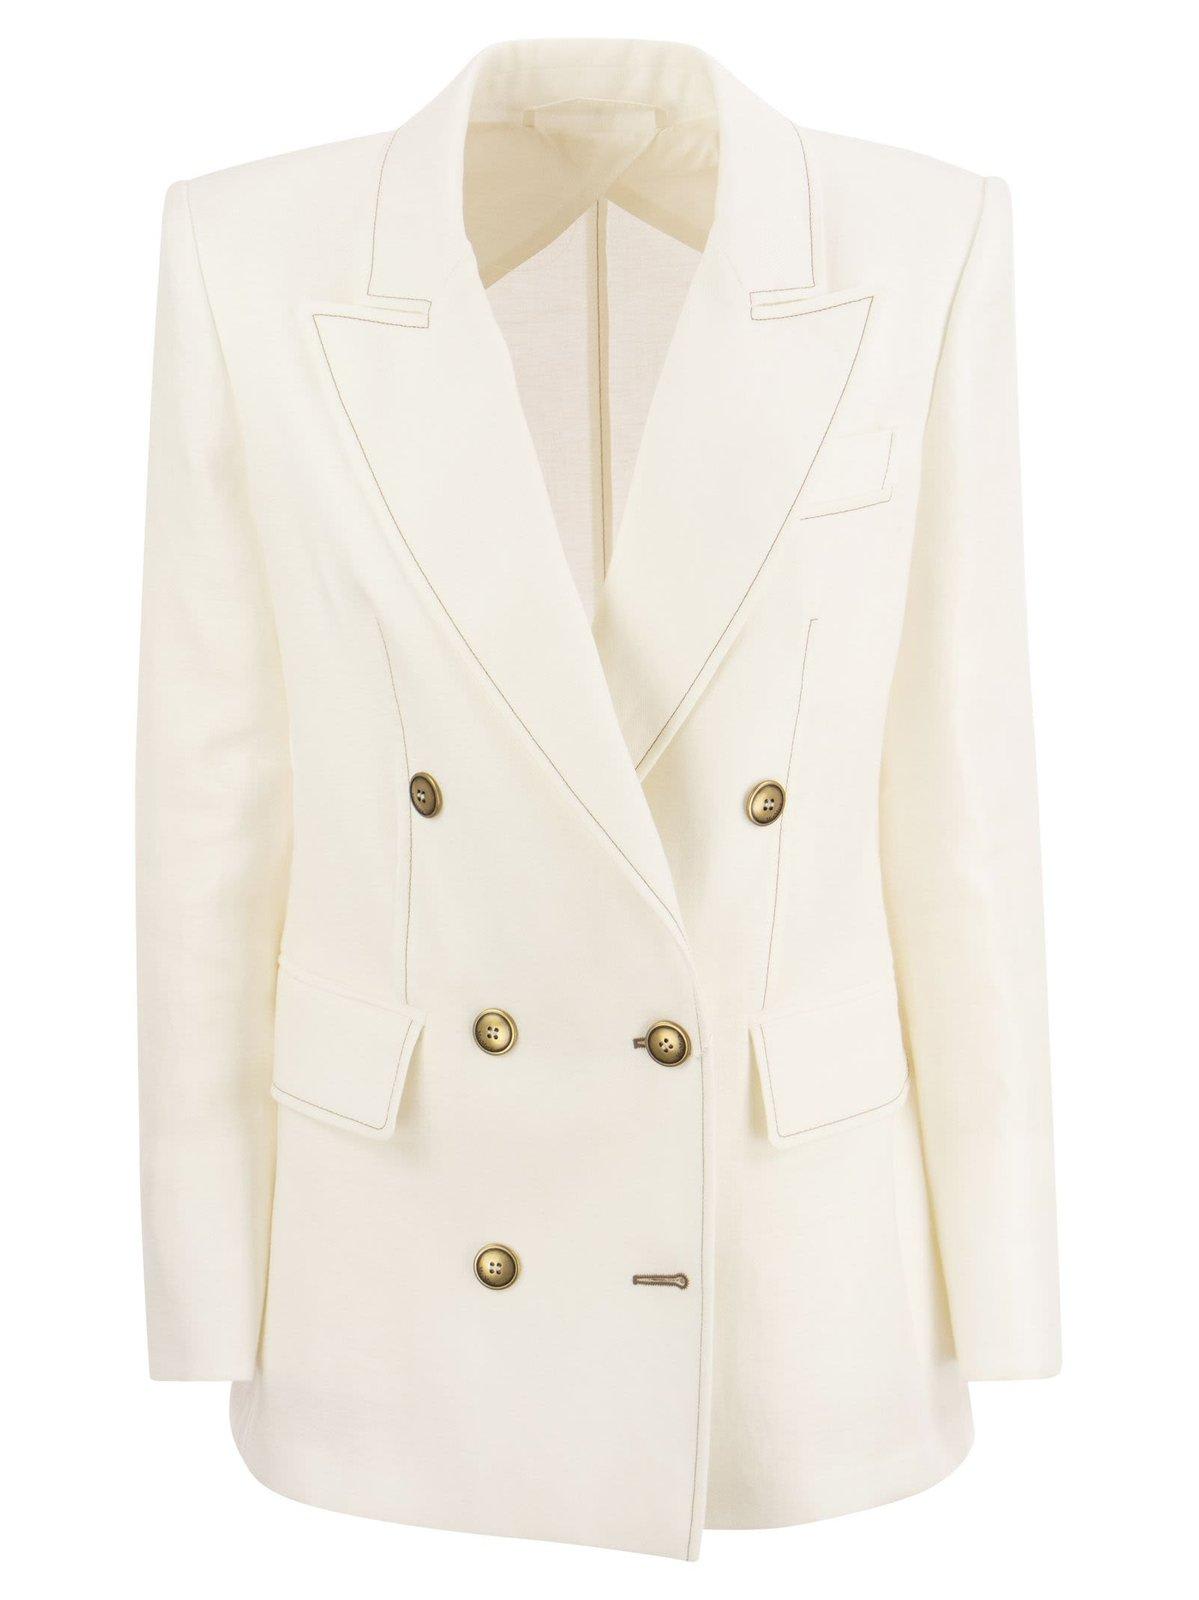 MAX MARA DOUBLE BREASTED TAILORED JACKET